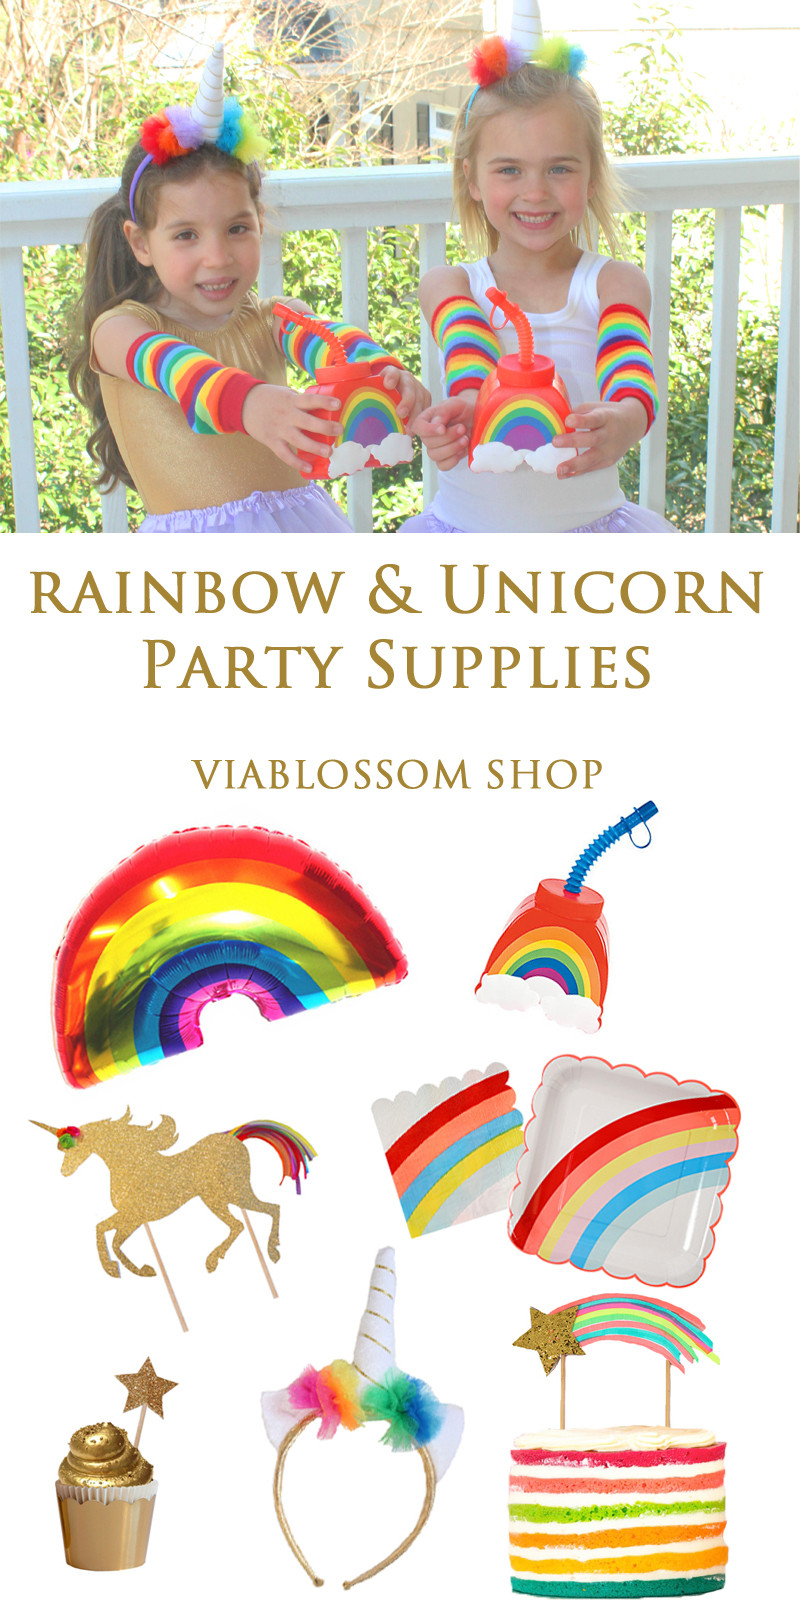 Rainbow And Unicorn Party Ideas
 Must Have Rainbow and Unicorn Party Supplies Via Blossom